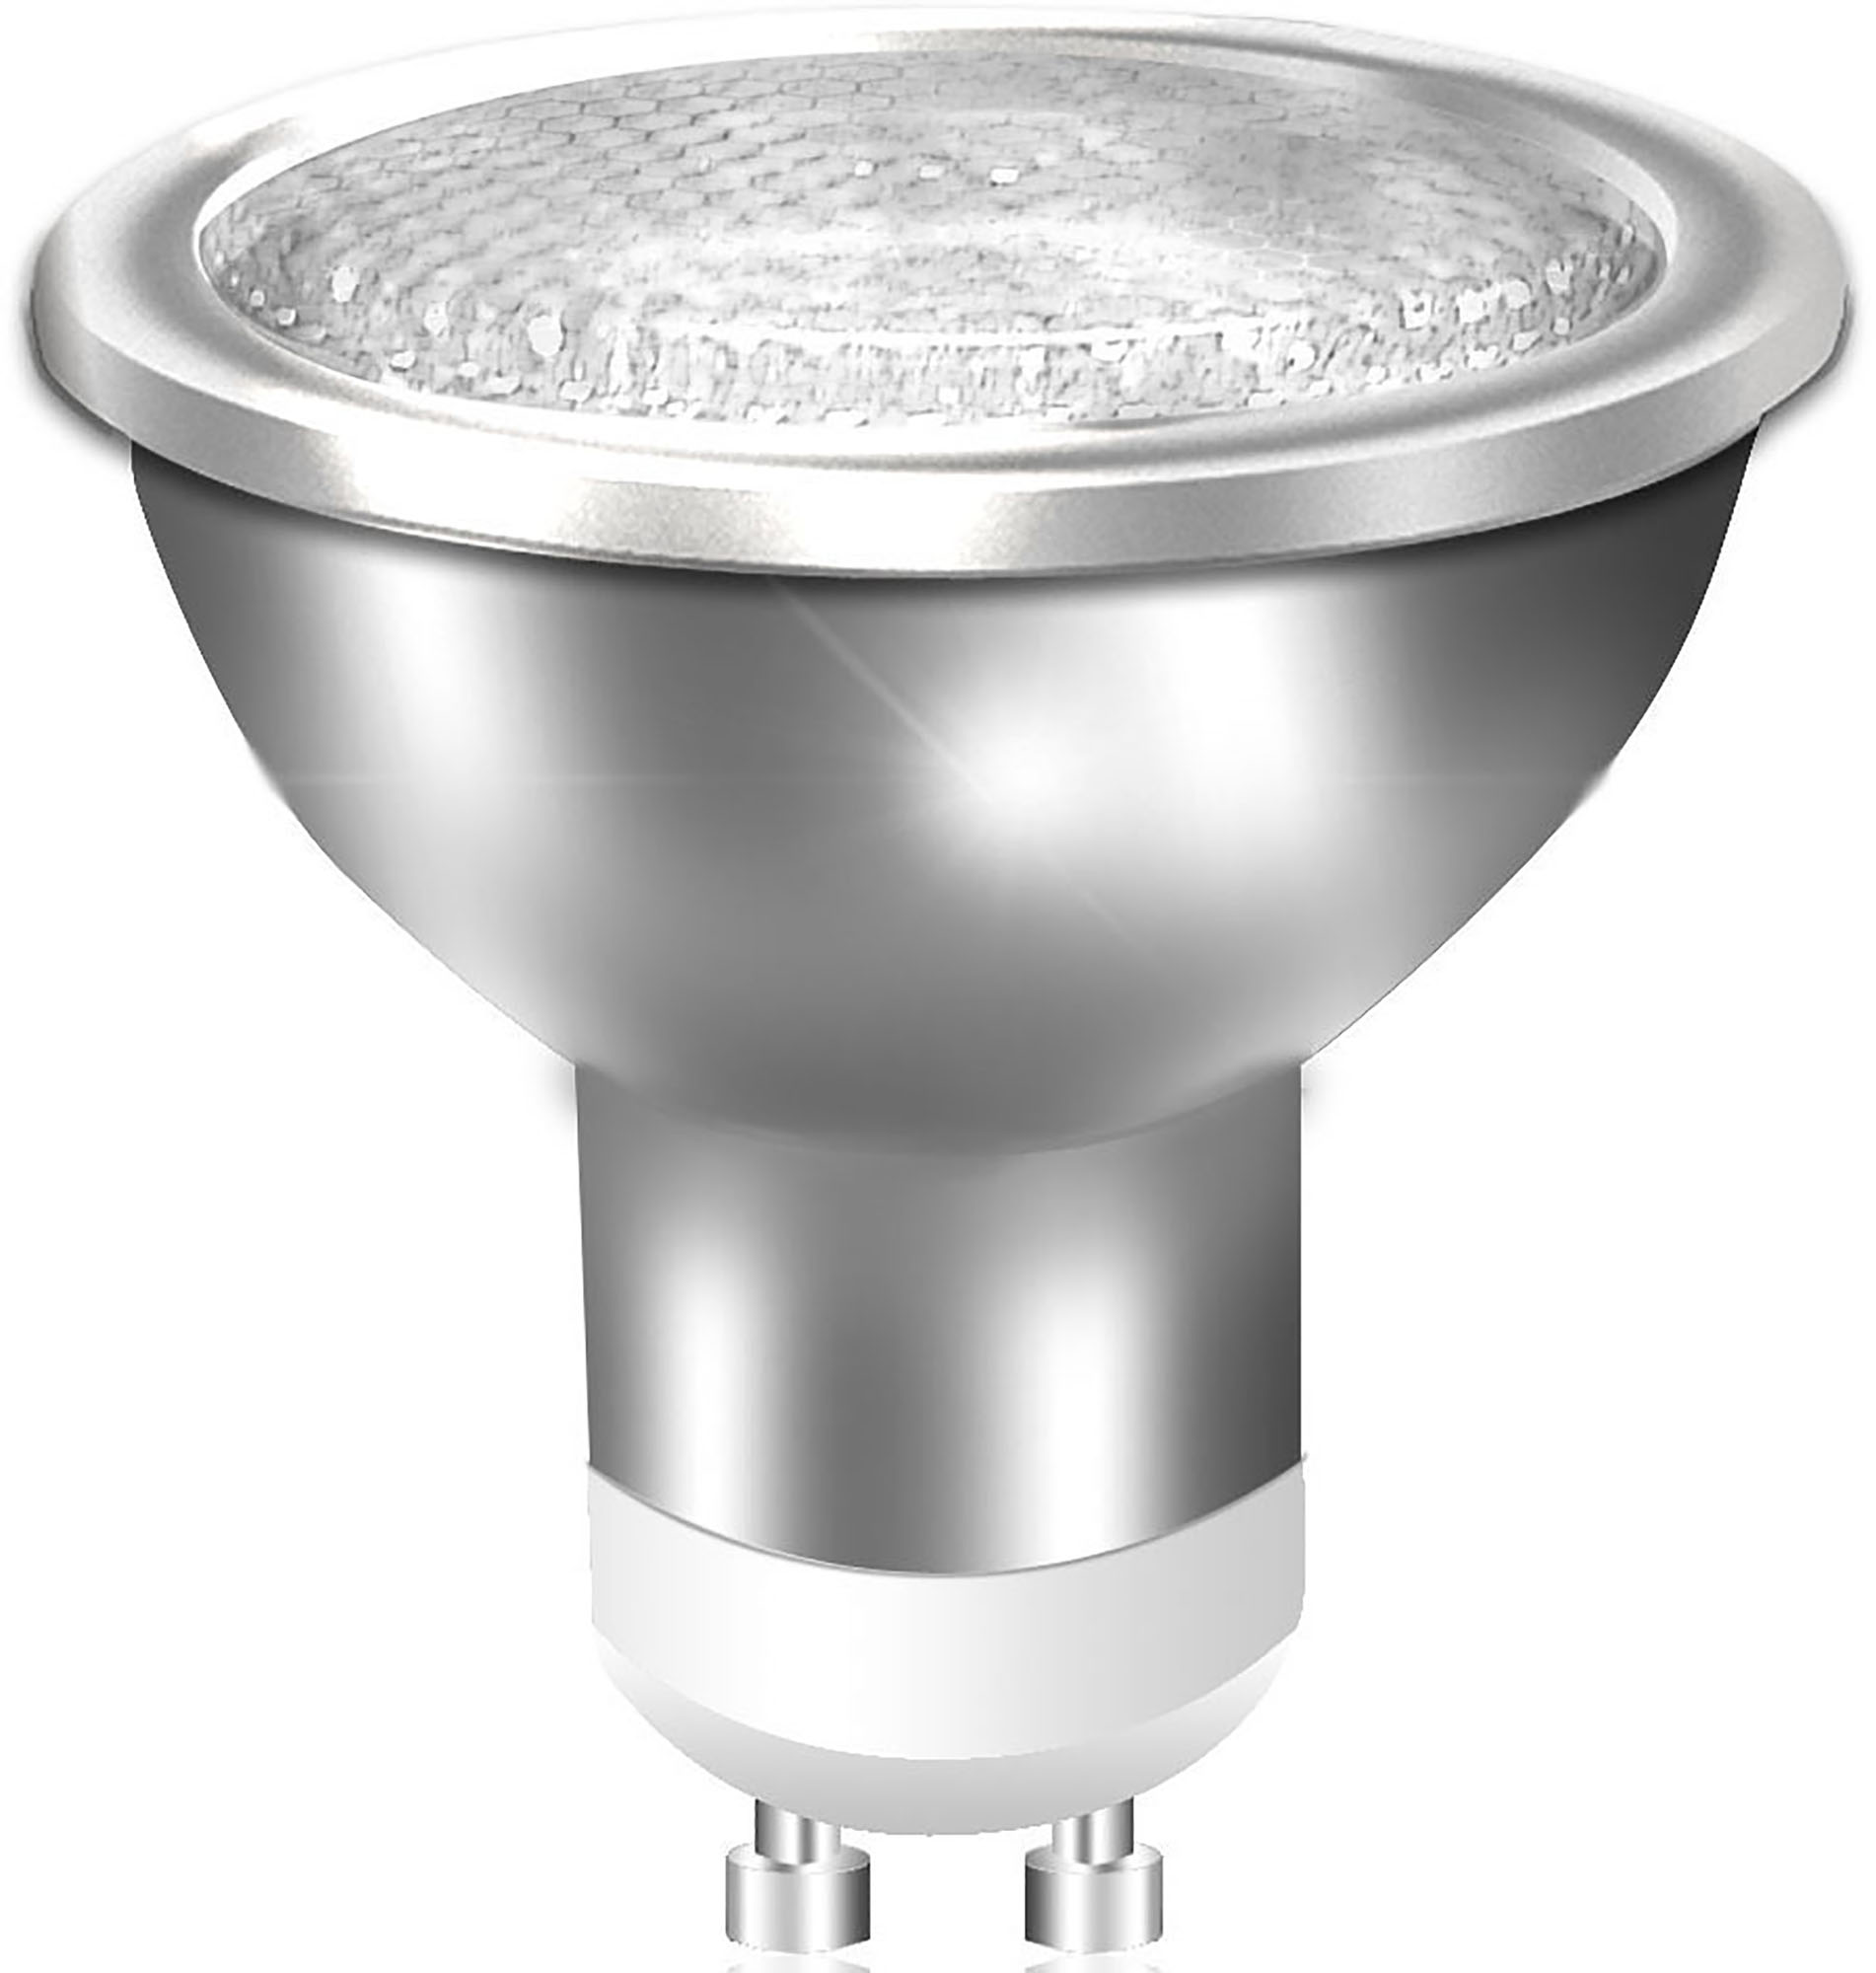 Extra Compact Supreme Compact Fluorescent Luxram Spot Lamps